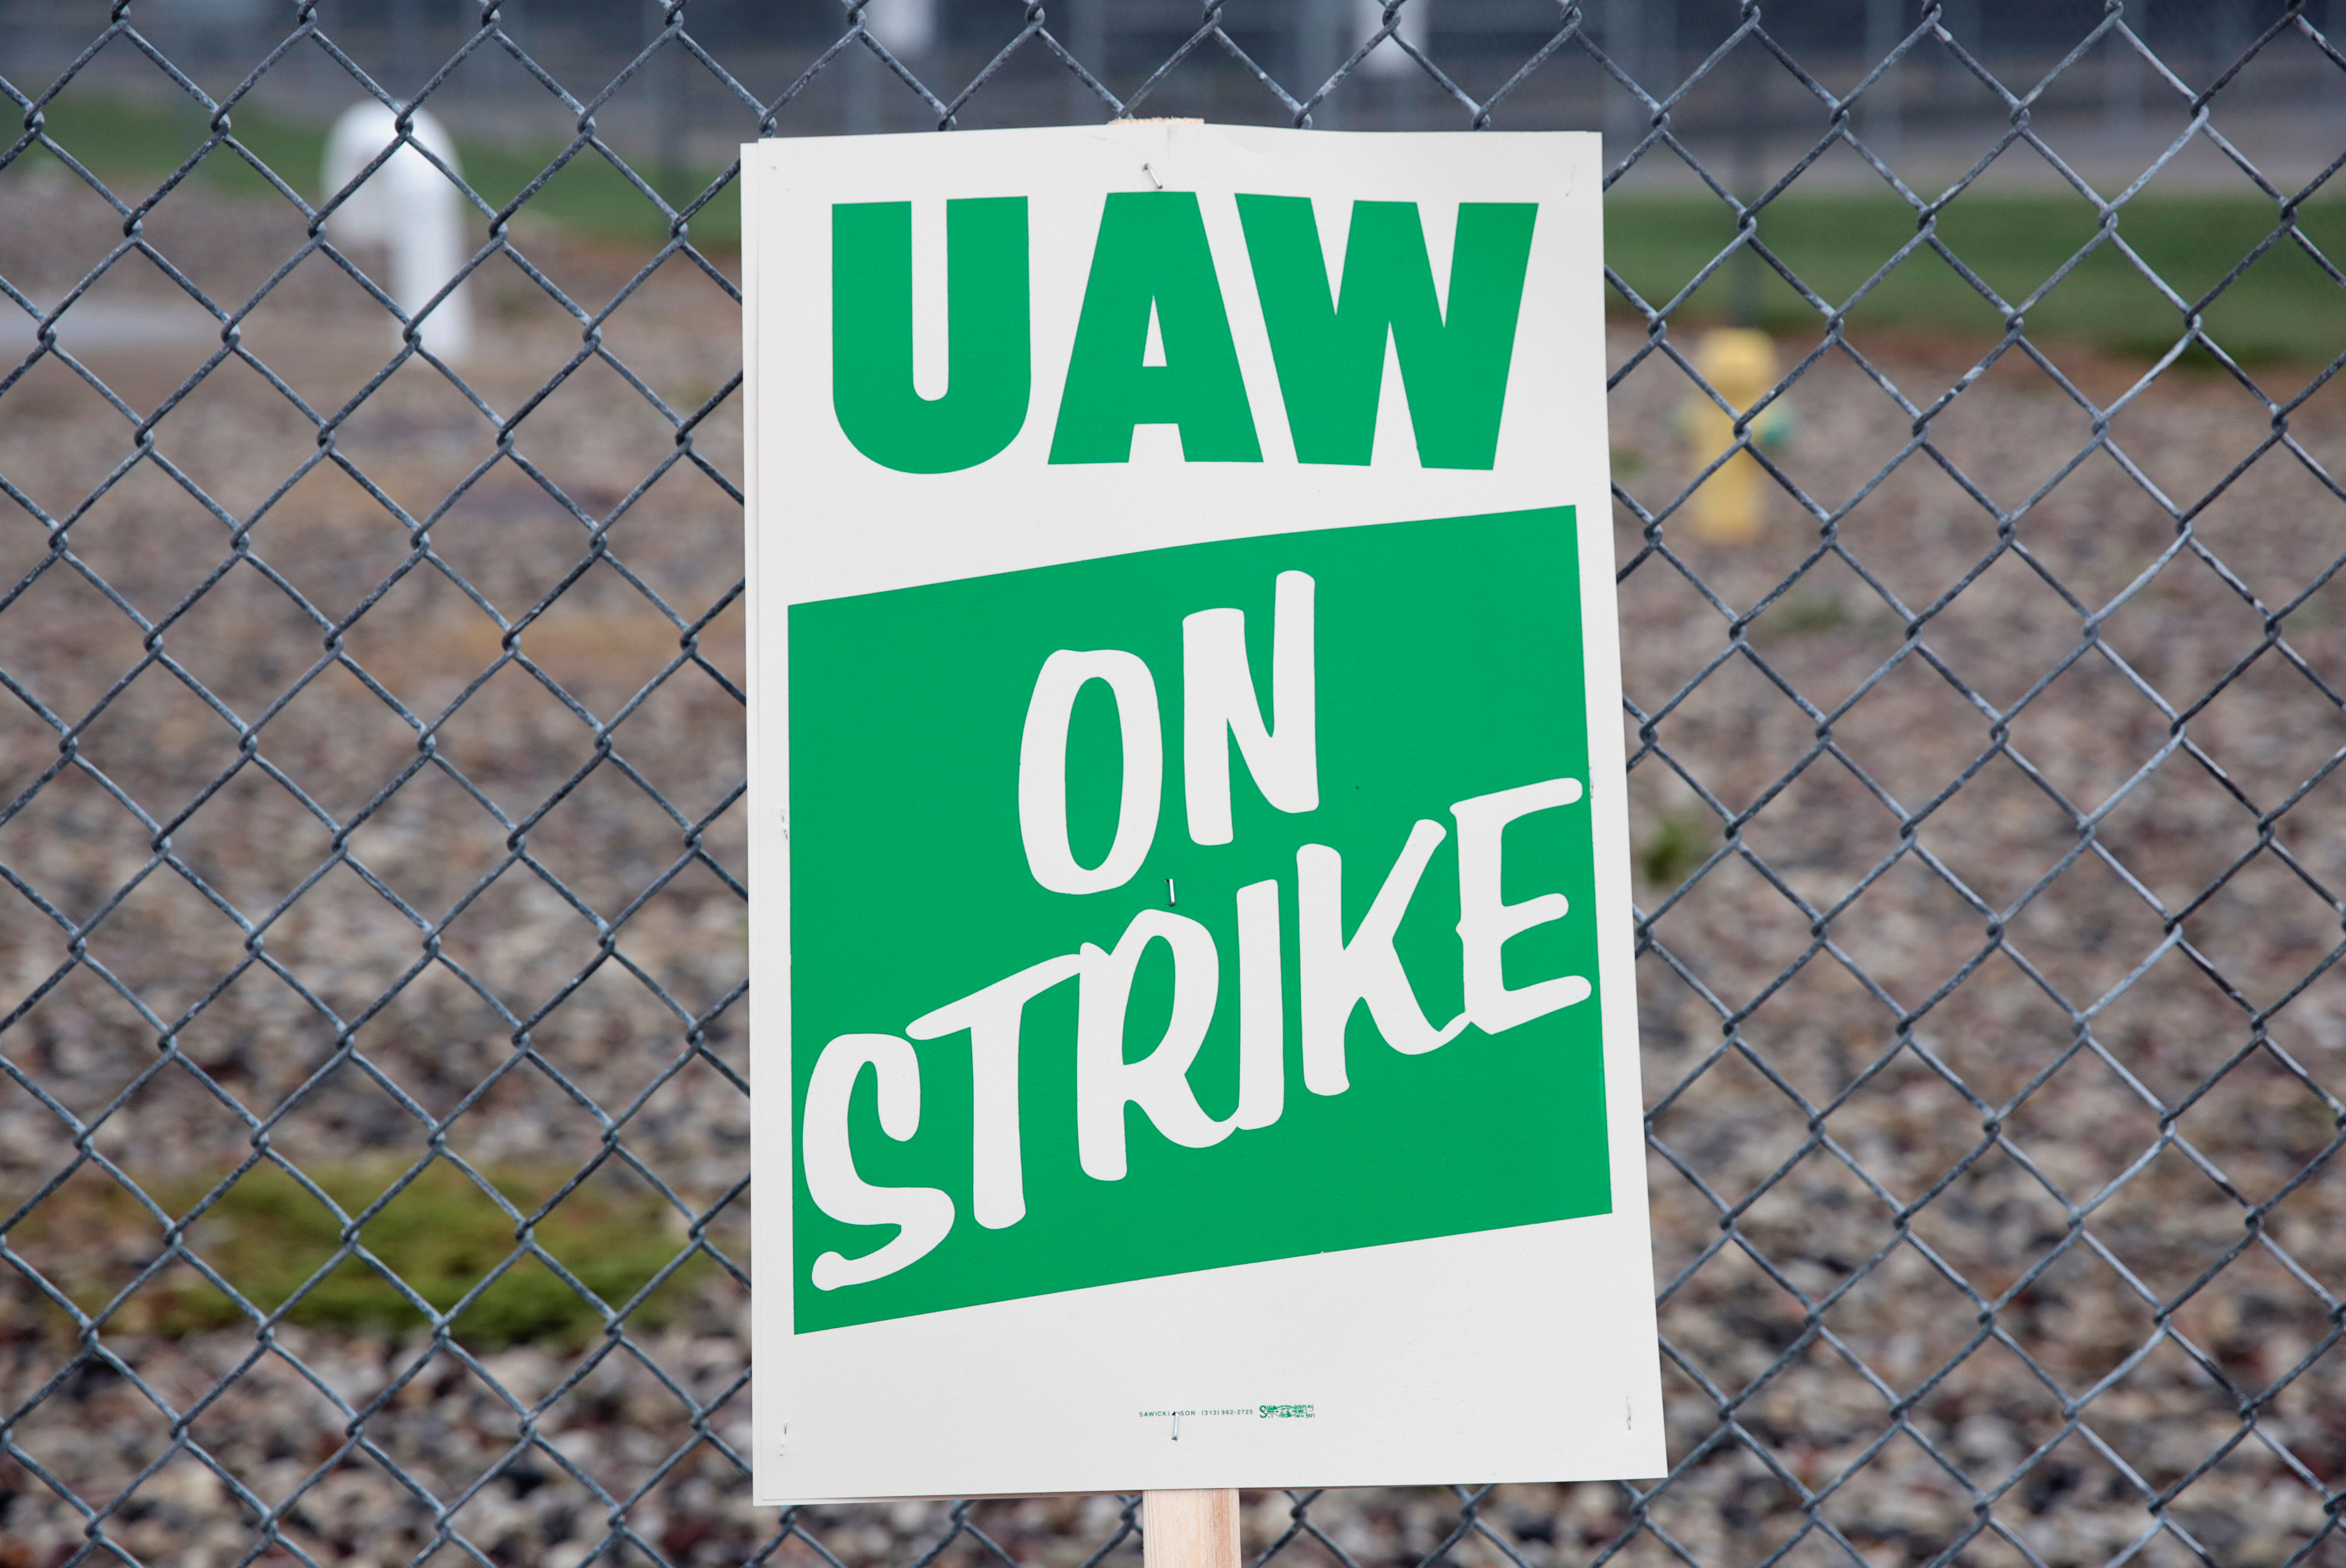 A United Auto Workers (UAW) picket sign is seen outside General Motors Powertrain Flint Engine plant during the UAW national strike in Flint